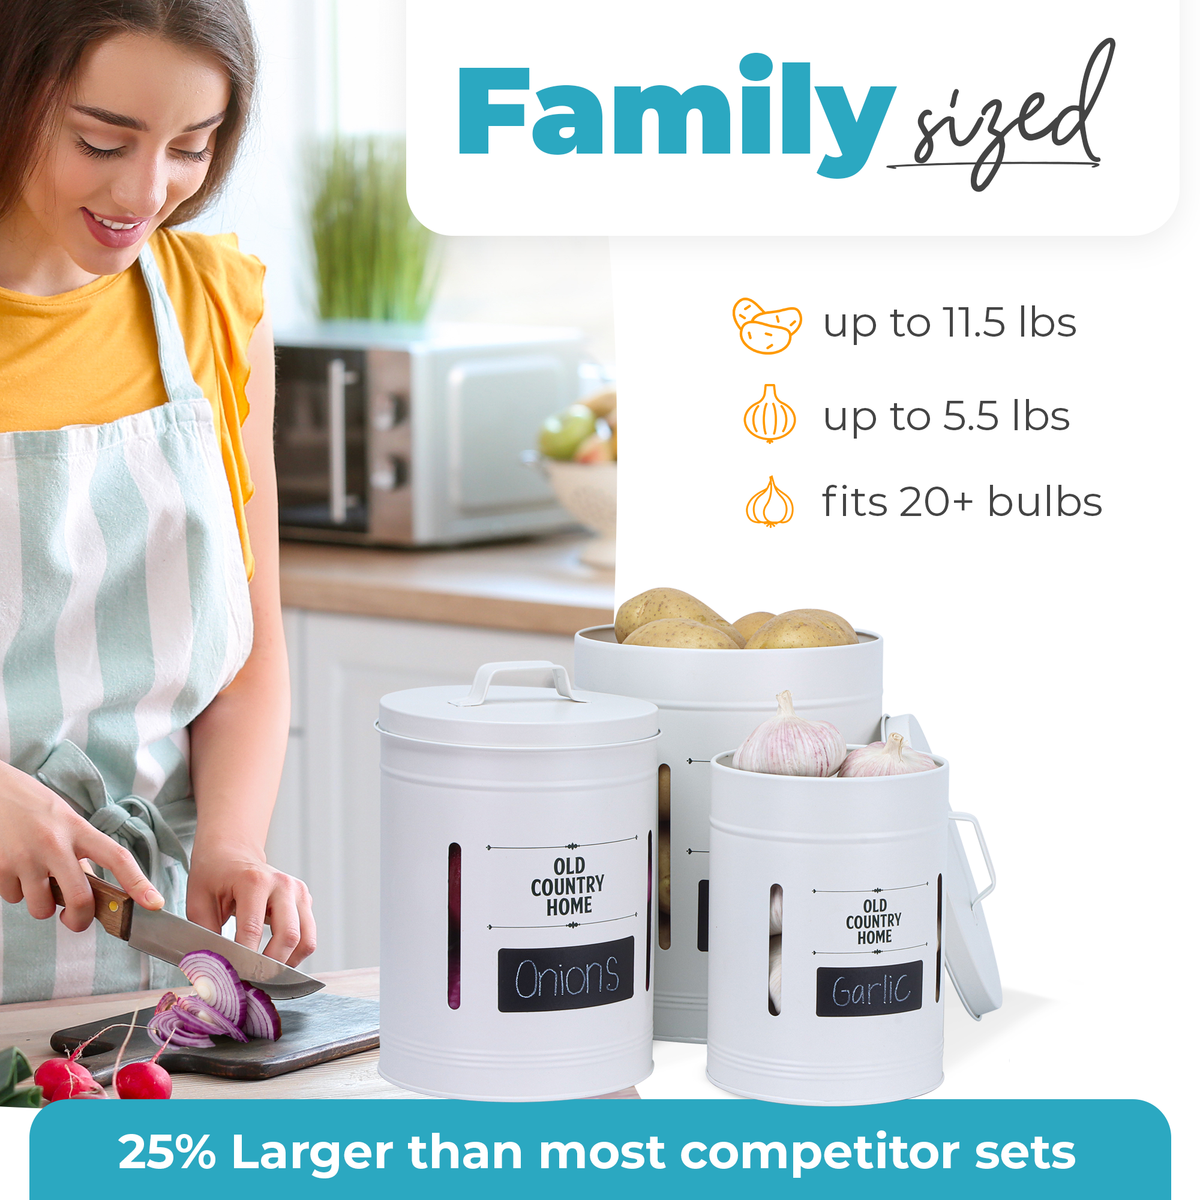 A family sized white veggie canister which is 25% larger than most competitor sets